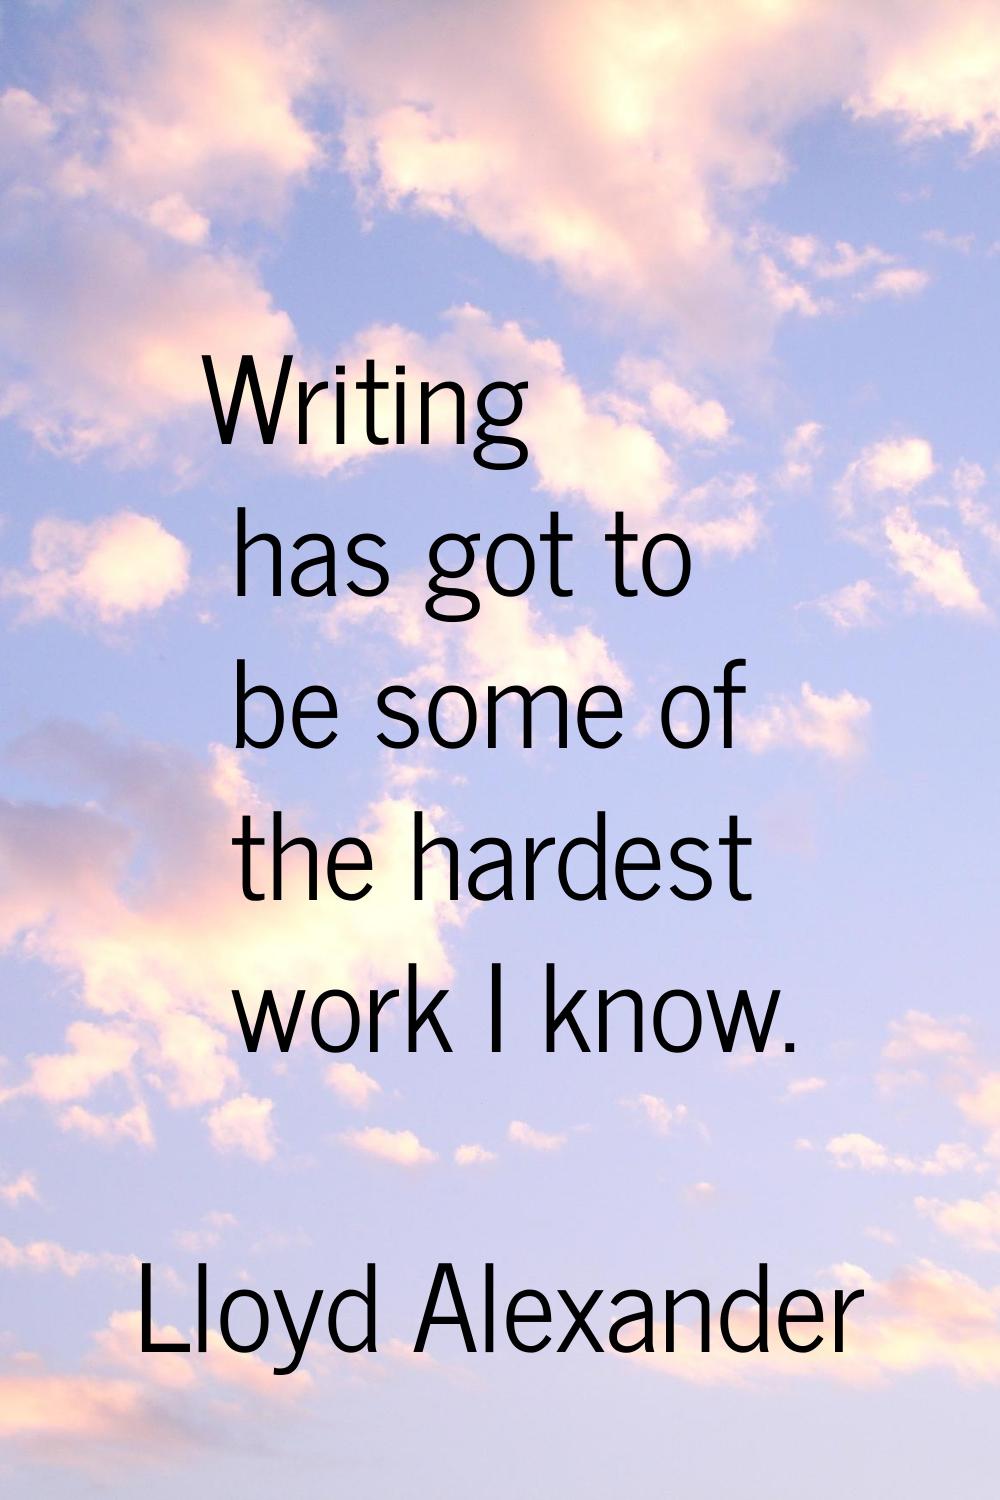 Writing has got to be some of the hardest work I know.